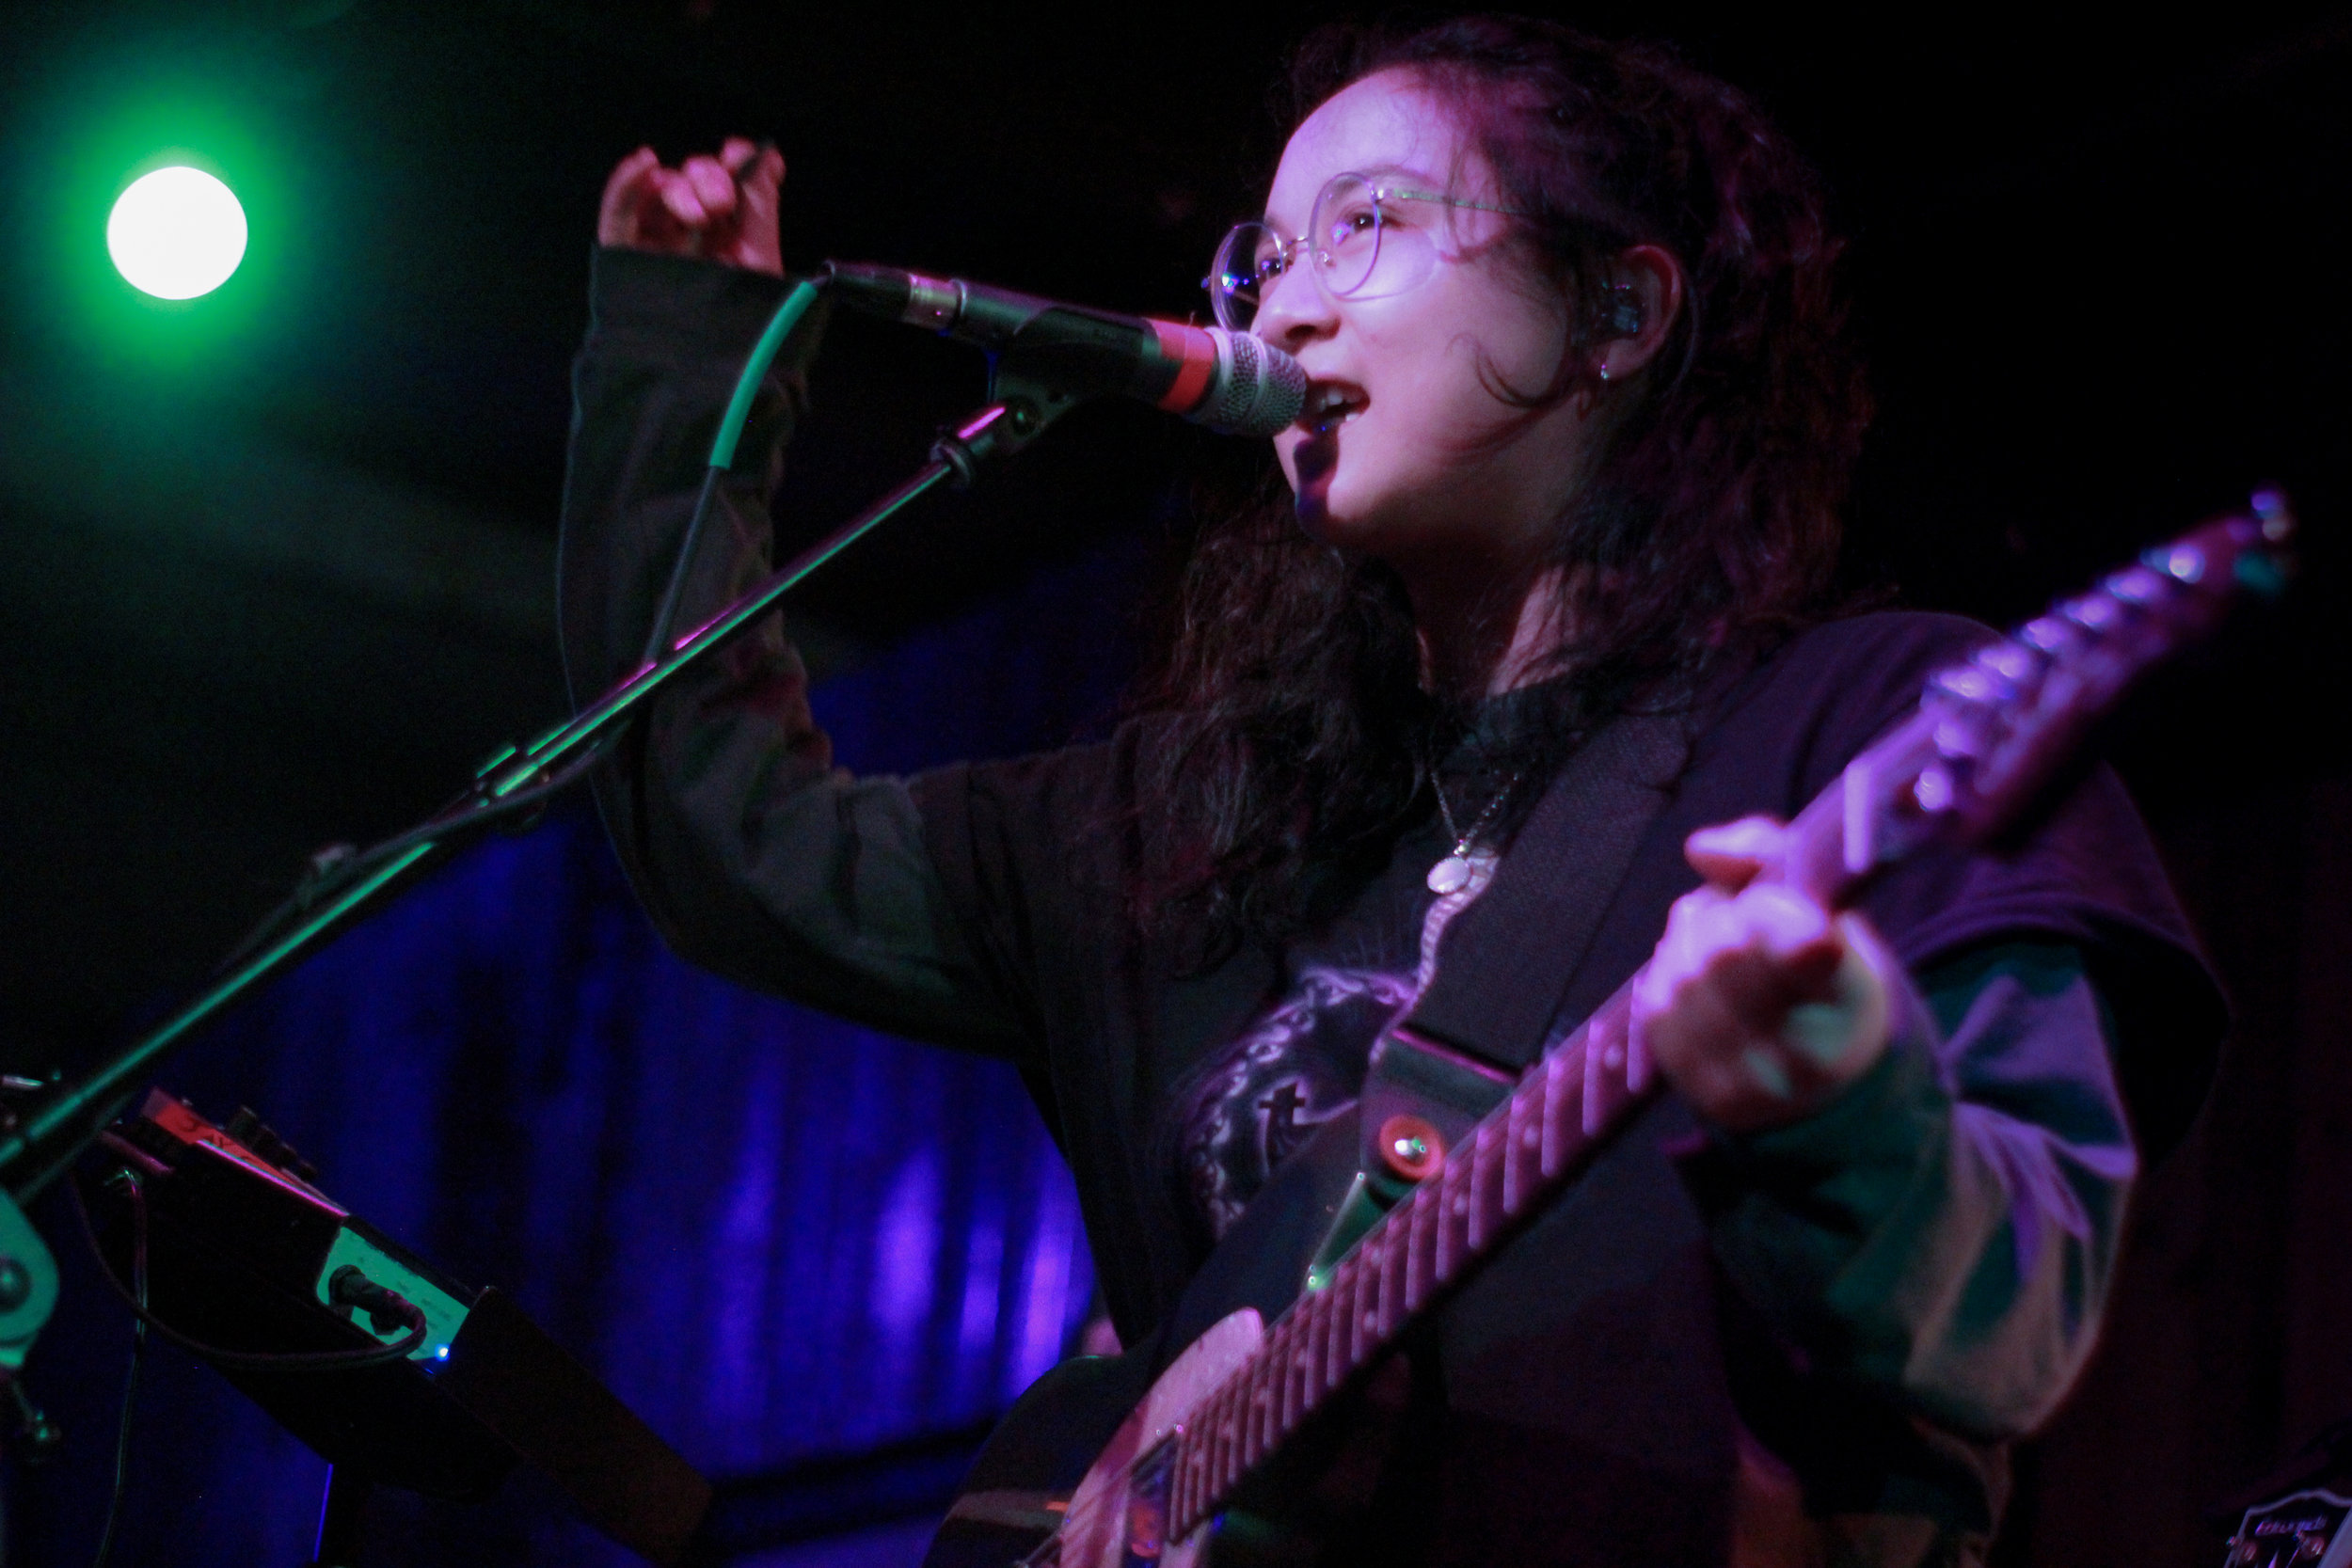  Jay Som rocks out during her Barracuda show on September 27 as part of her Anak Ko world tour. “Anak Ko” was her second album following the highly praised, “Everybody Works”. 